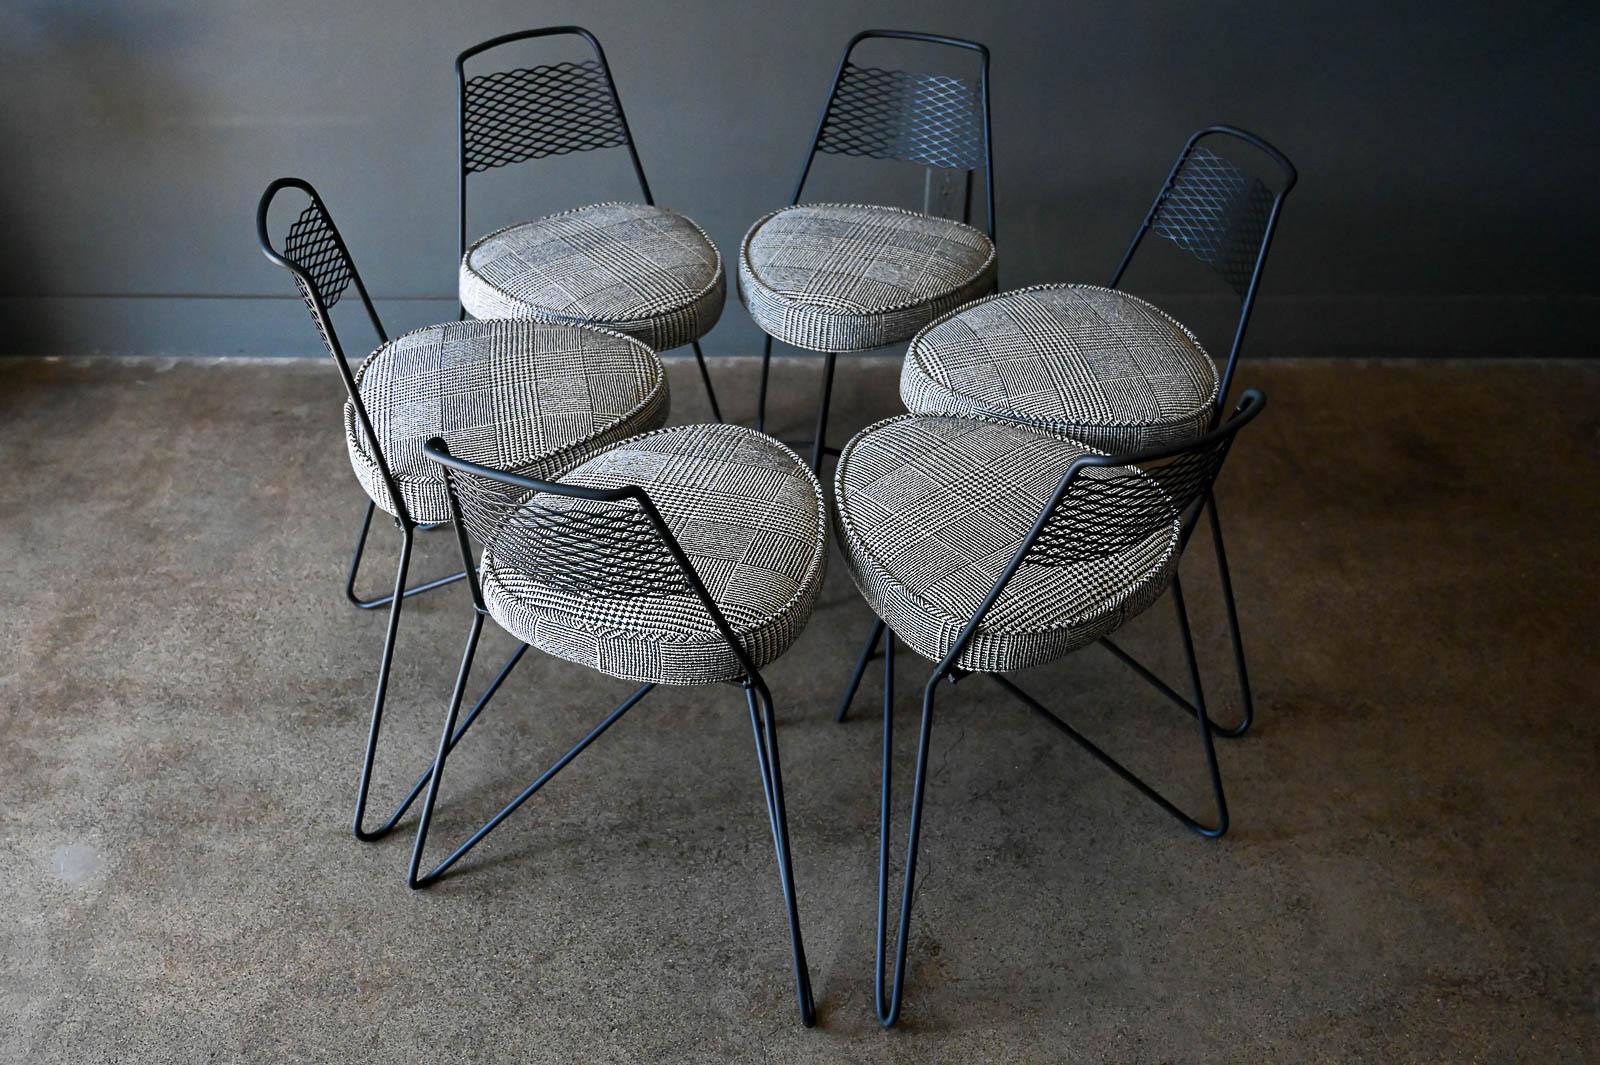 Set of 6 Expanded Metal and Iron Leg Dining Chairs, ca. 1960.  Professionally restored with new matte black powder coat and classic plaid indoor/outdoor fabric with new foam seats.  Perfect for an outdoor setting around a fire pit or table.  